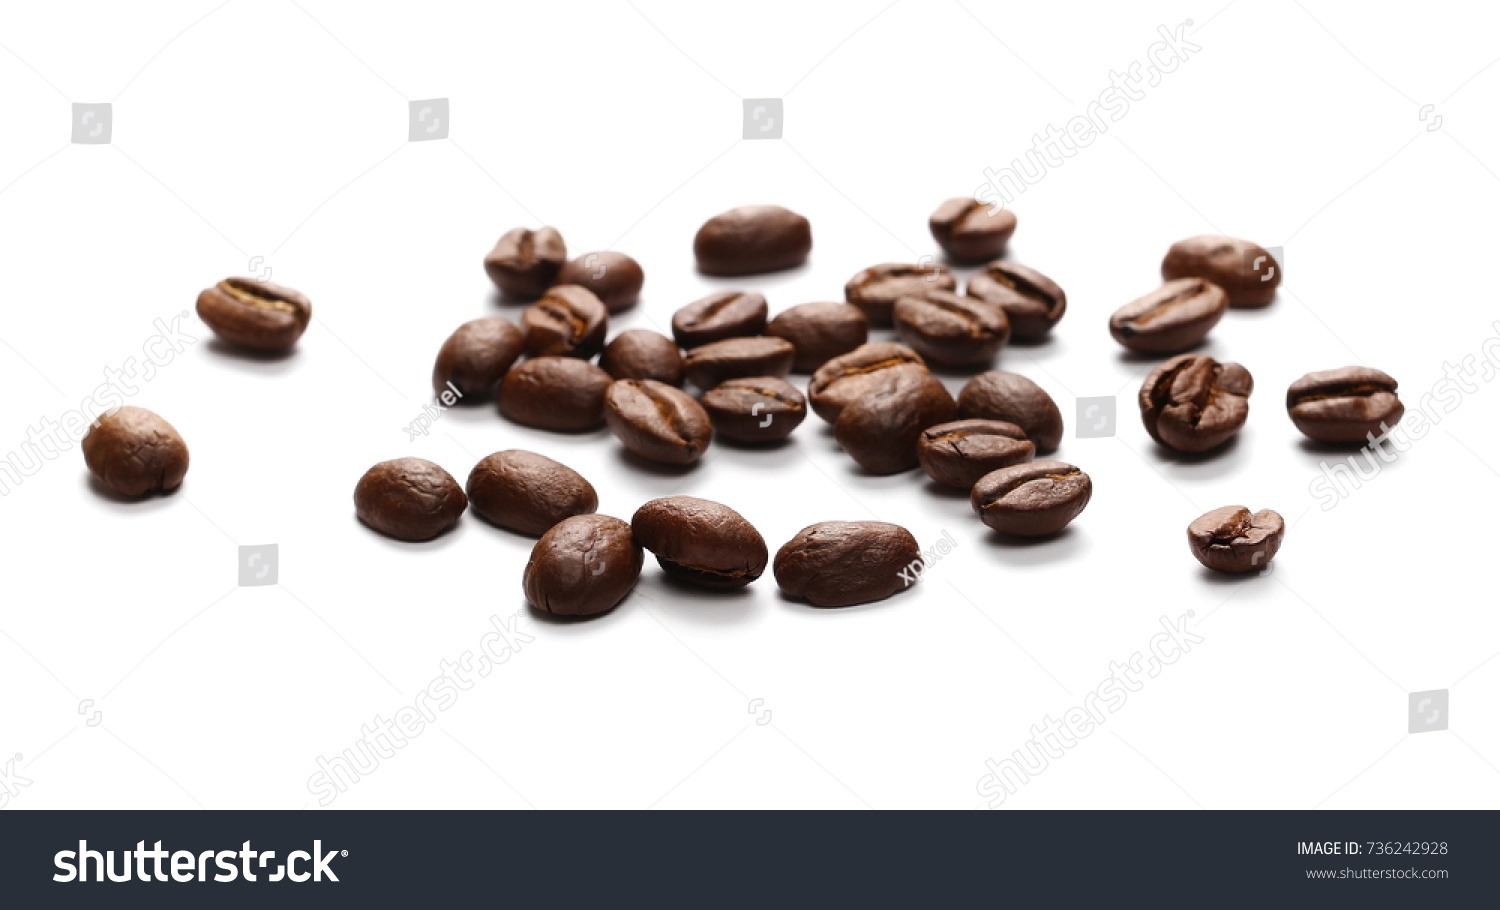 Pile coffee beans isolated on white background and texture, top view
 #736242928